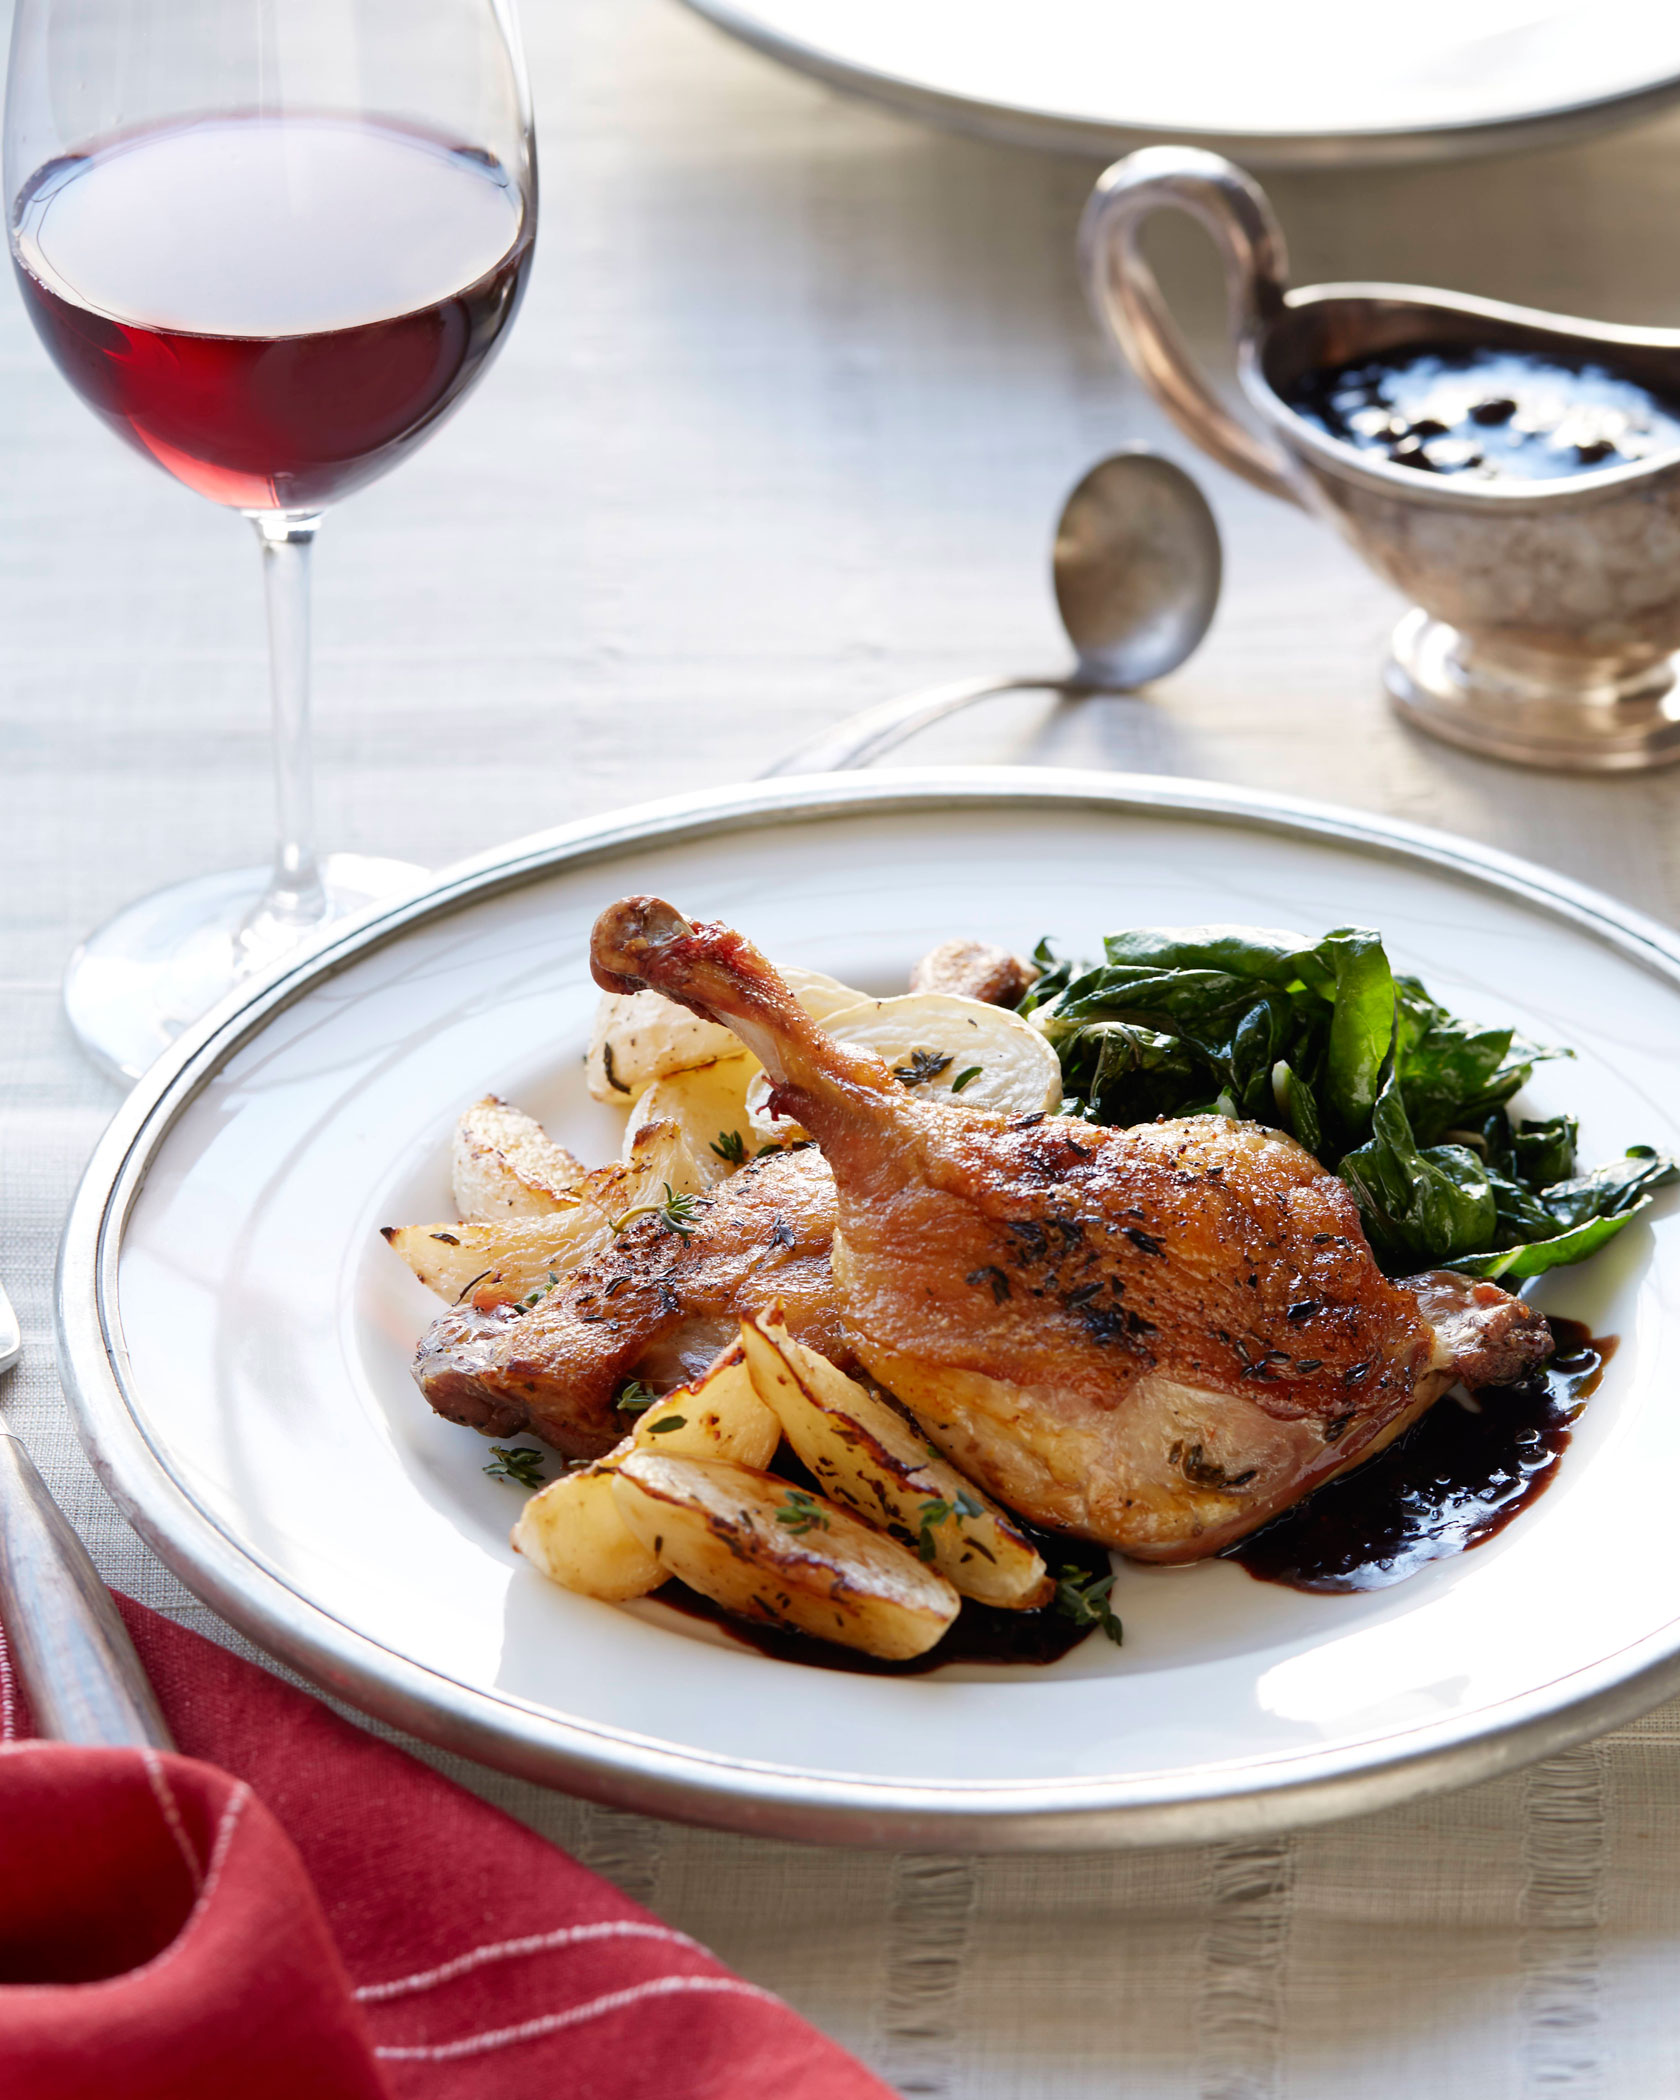 Roasted Duck Leg with Black Currant Sauce and Roasted Turnips